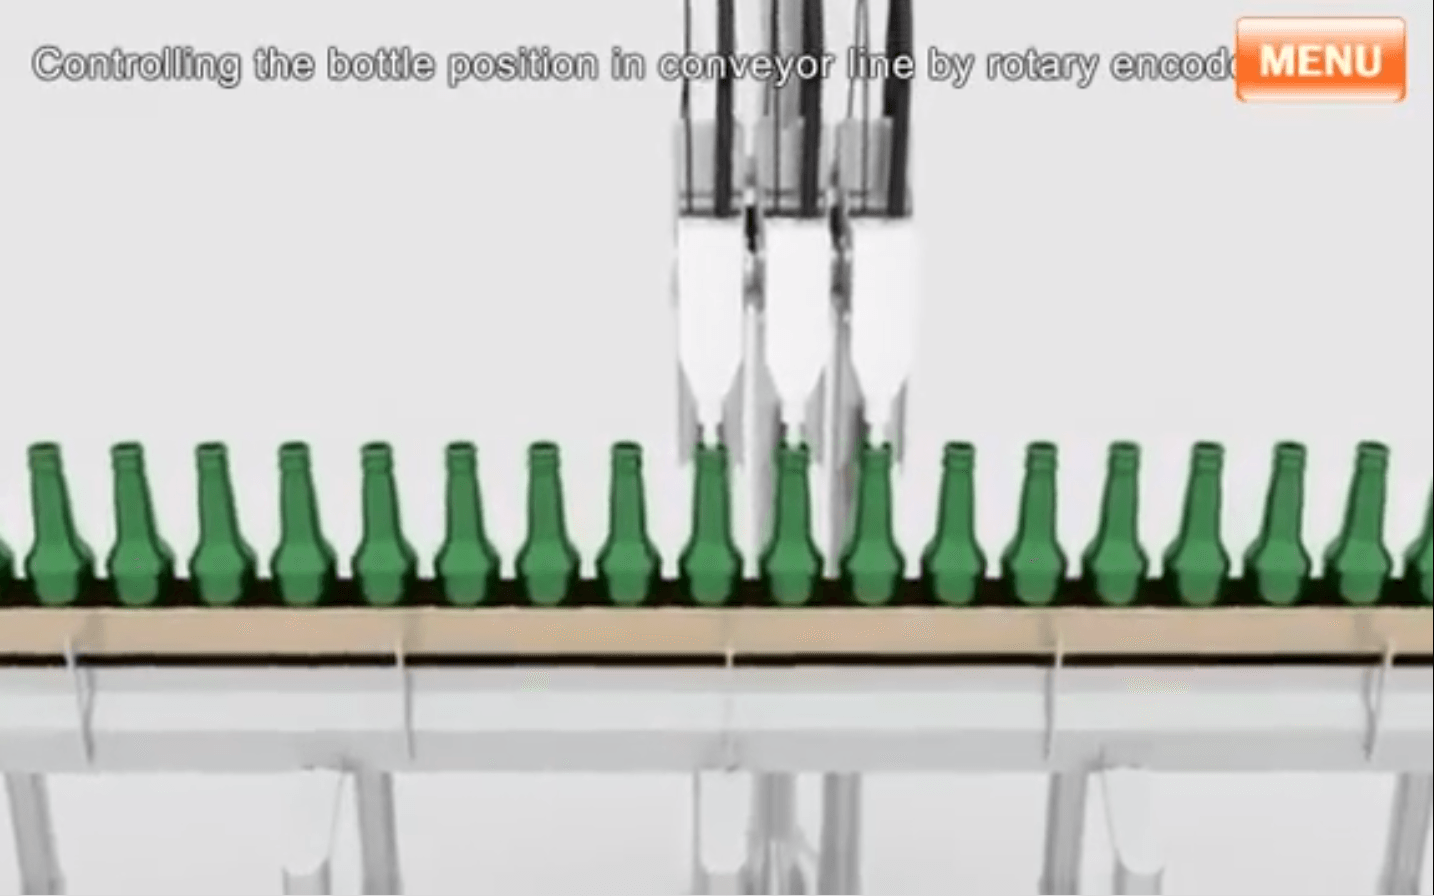 E40s - Controlling the bottle position in conveyor line by rotary encoder